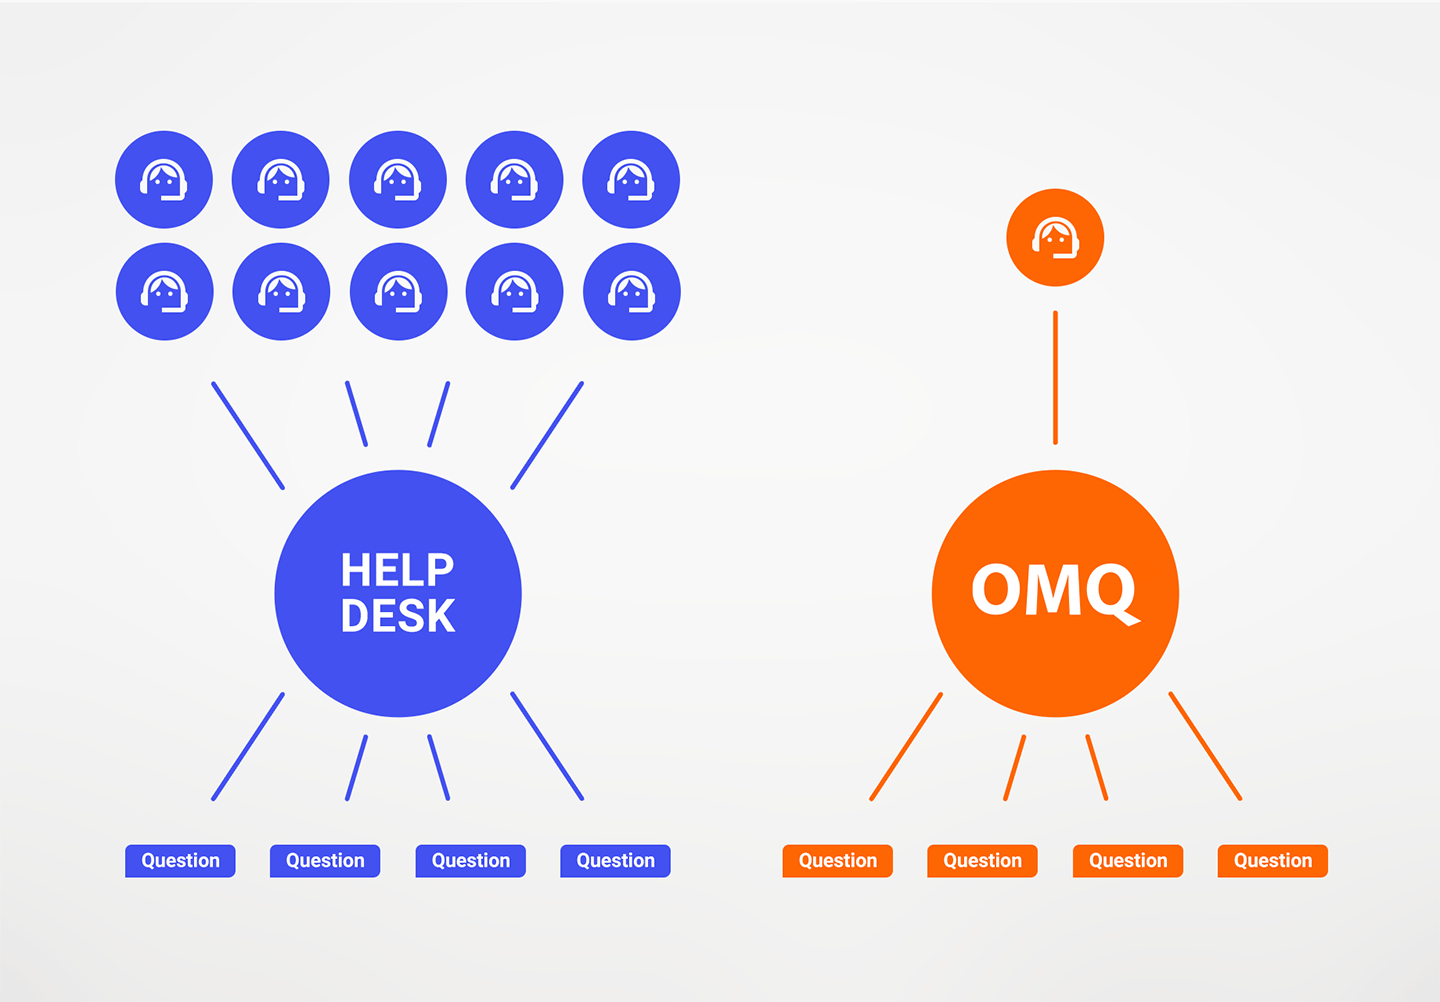 Omq meaning